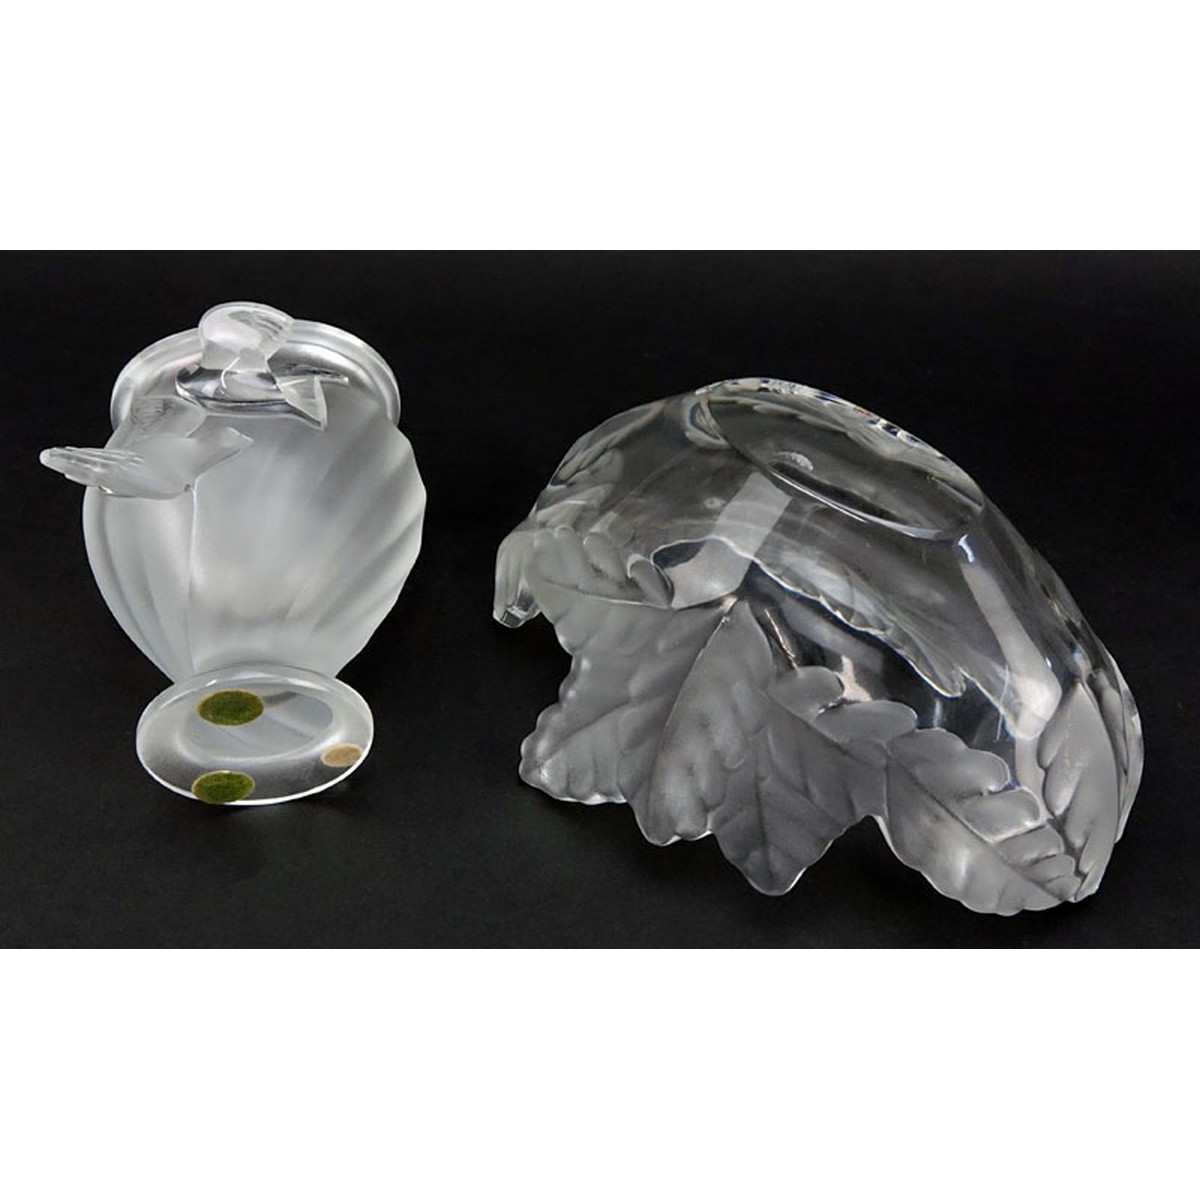 Grouping of Two (2): Lalique Compiegne Crystal Bowl, Lalique Crystal Dove Crystal Vase. Each signed appropriately.